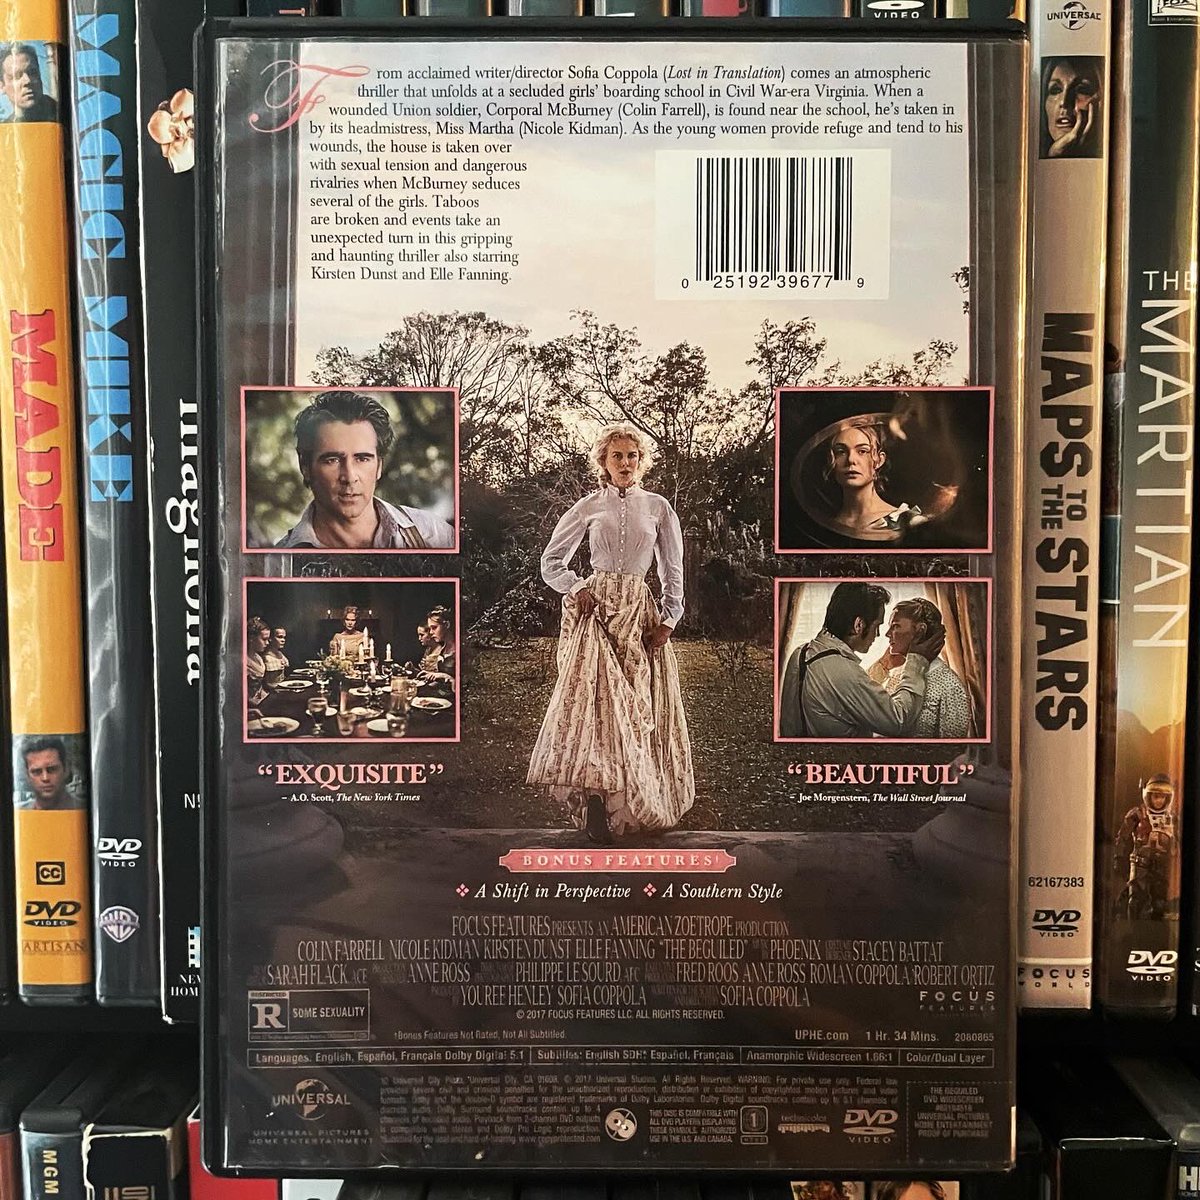 “You’re our most unwelcome visitor, and we do not propose to entertain you”
#thebeguiled #thomascullinan #donsiegel #clinteastwood #geraldinepage #elizabethhartman #sofiacoppola #kirstendunst #nicolekidman #ellefanning #colinfarrell #angourierice #addisonriecke #oonalaurence #dvd